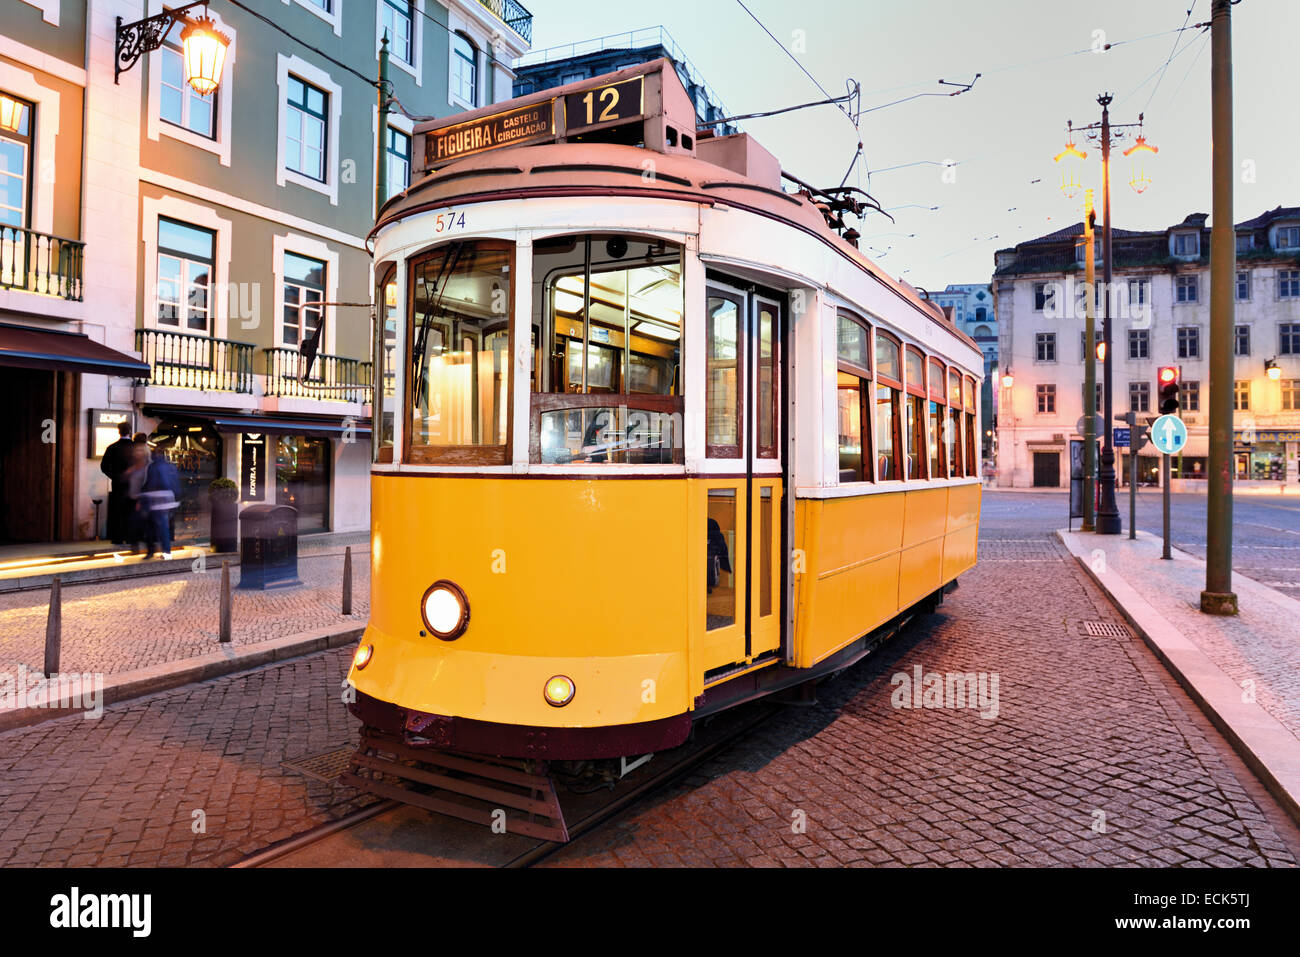 Portugal, Lisbon: Historic Electric tram No. 12 in downtown Lisbon Stock Photo